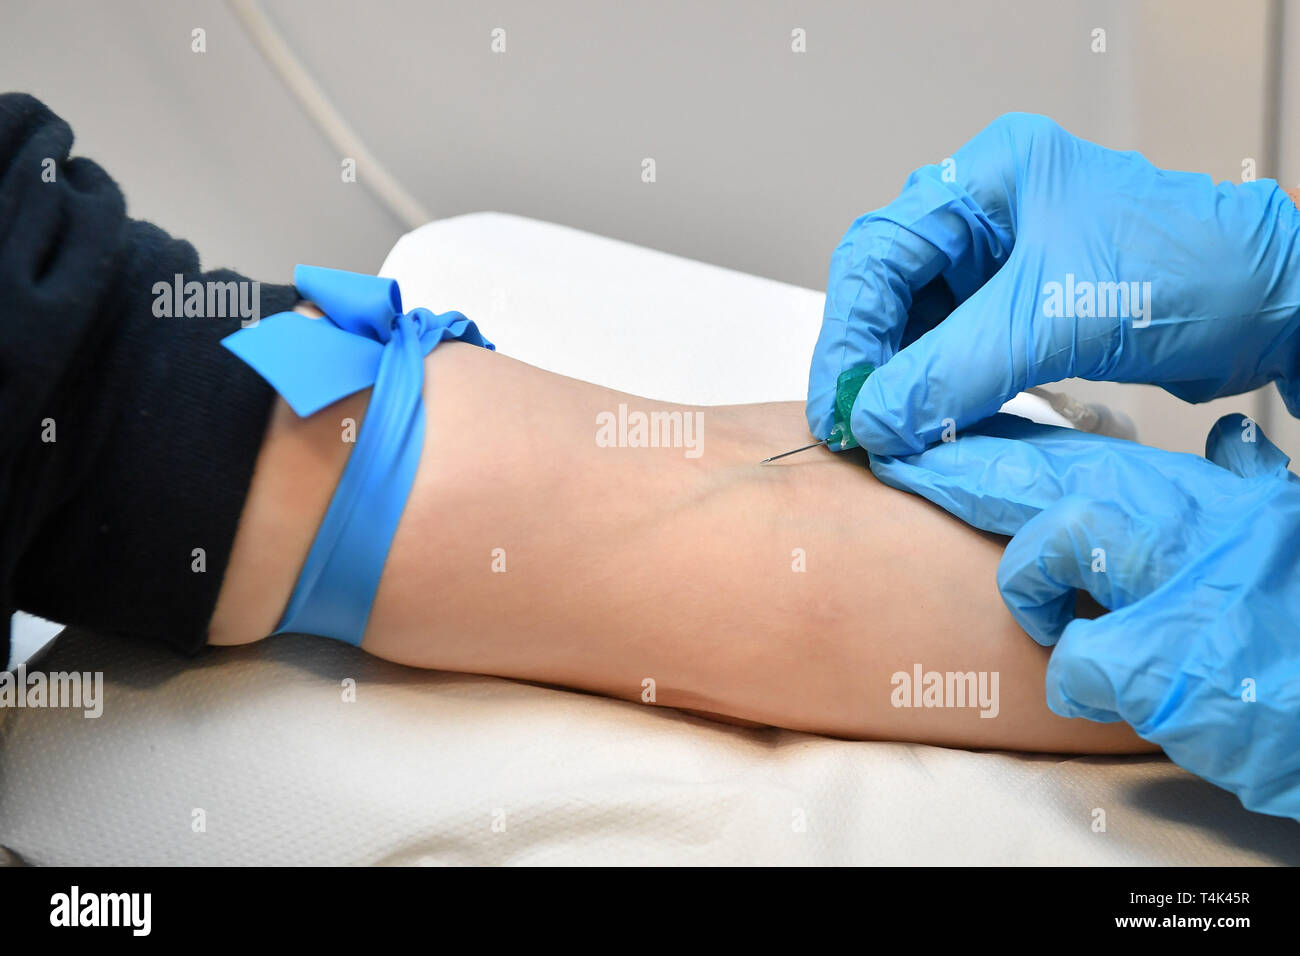 A needle or butterfly cannula is inserted into a vein in an arm with a tourniquet to take blood from a patient in a medical clinic, based at University of Bristol. PRESS ASSOCIATION Photo. Picture date: Monday April 8, 2019. Photo credit should read: Ben Birchall Stock Photo